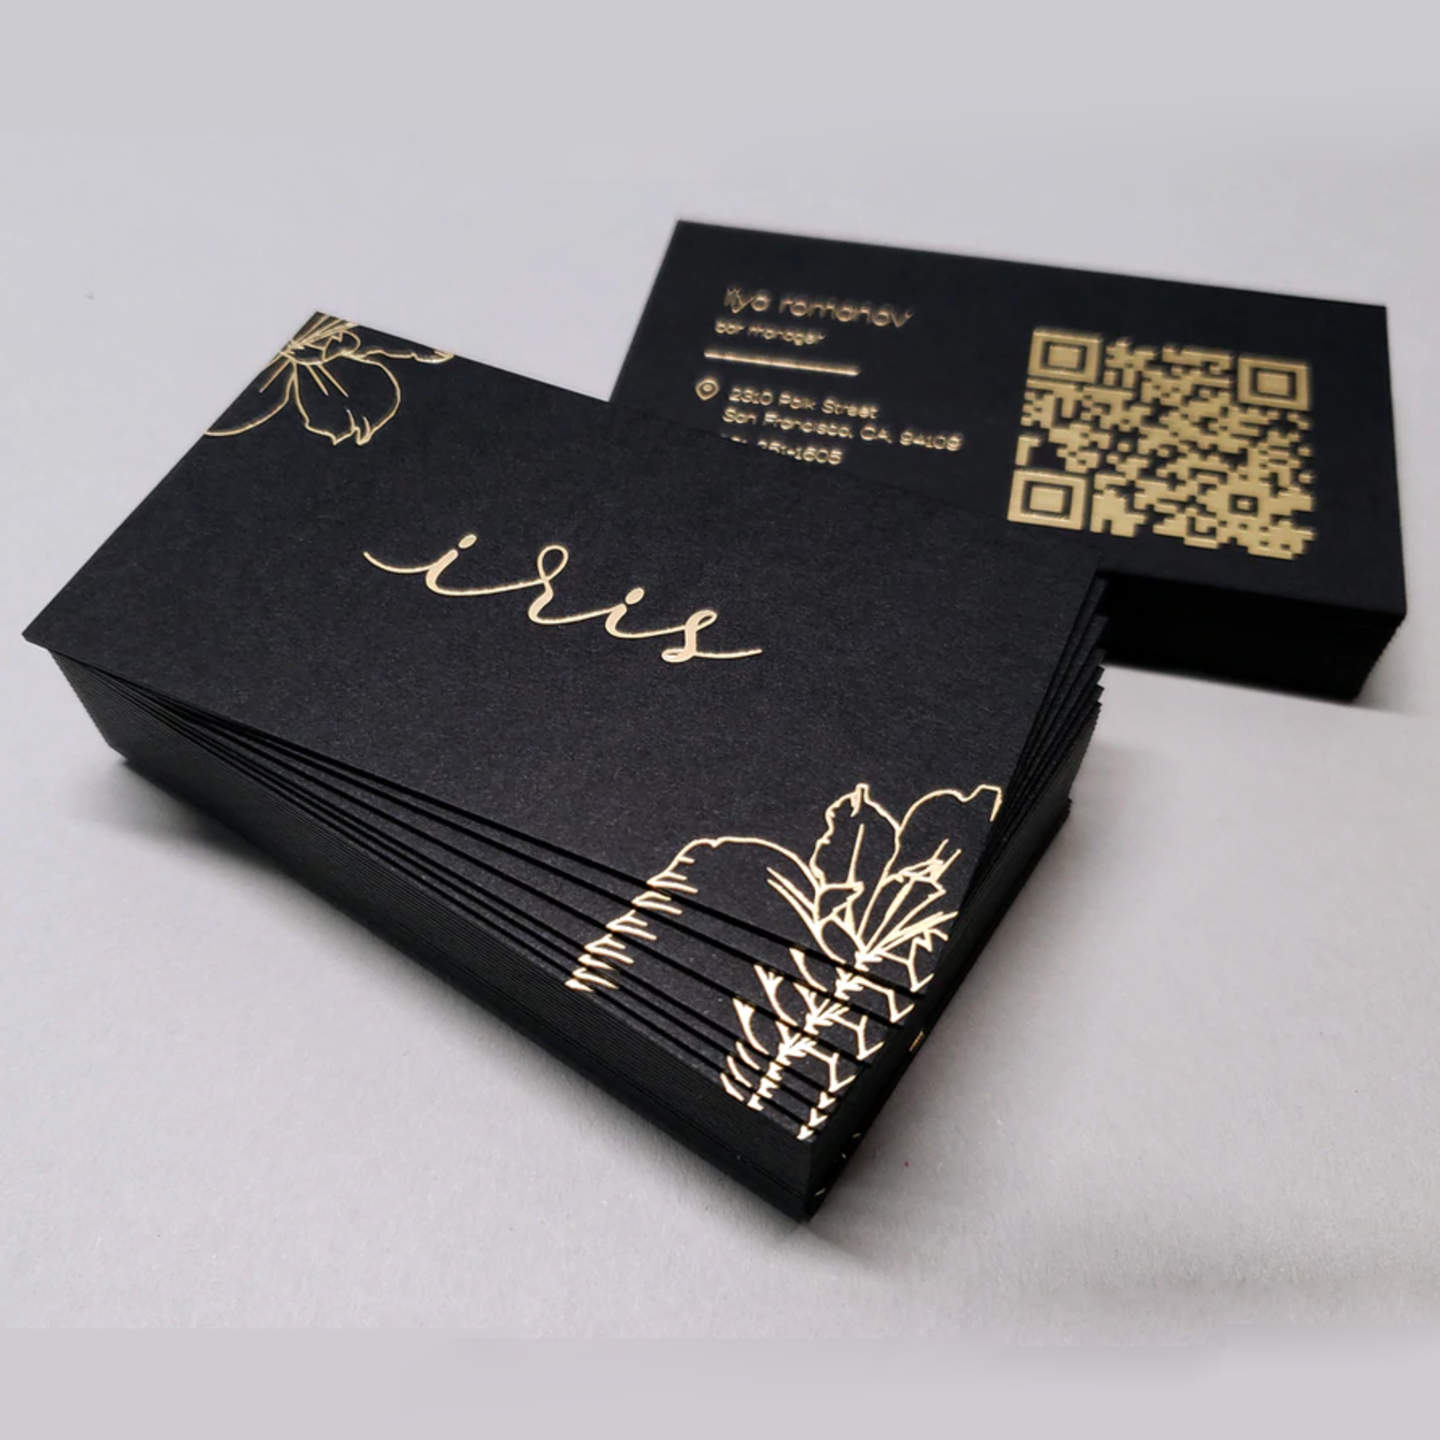 Premium Visiting Card - Golden Embossing on Front Side & Both Side Printed Card with Matt Lamination & Spot UV  - 1000 nos.